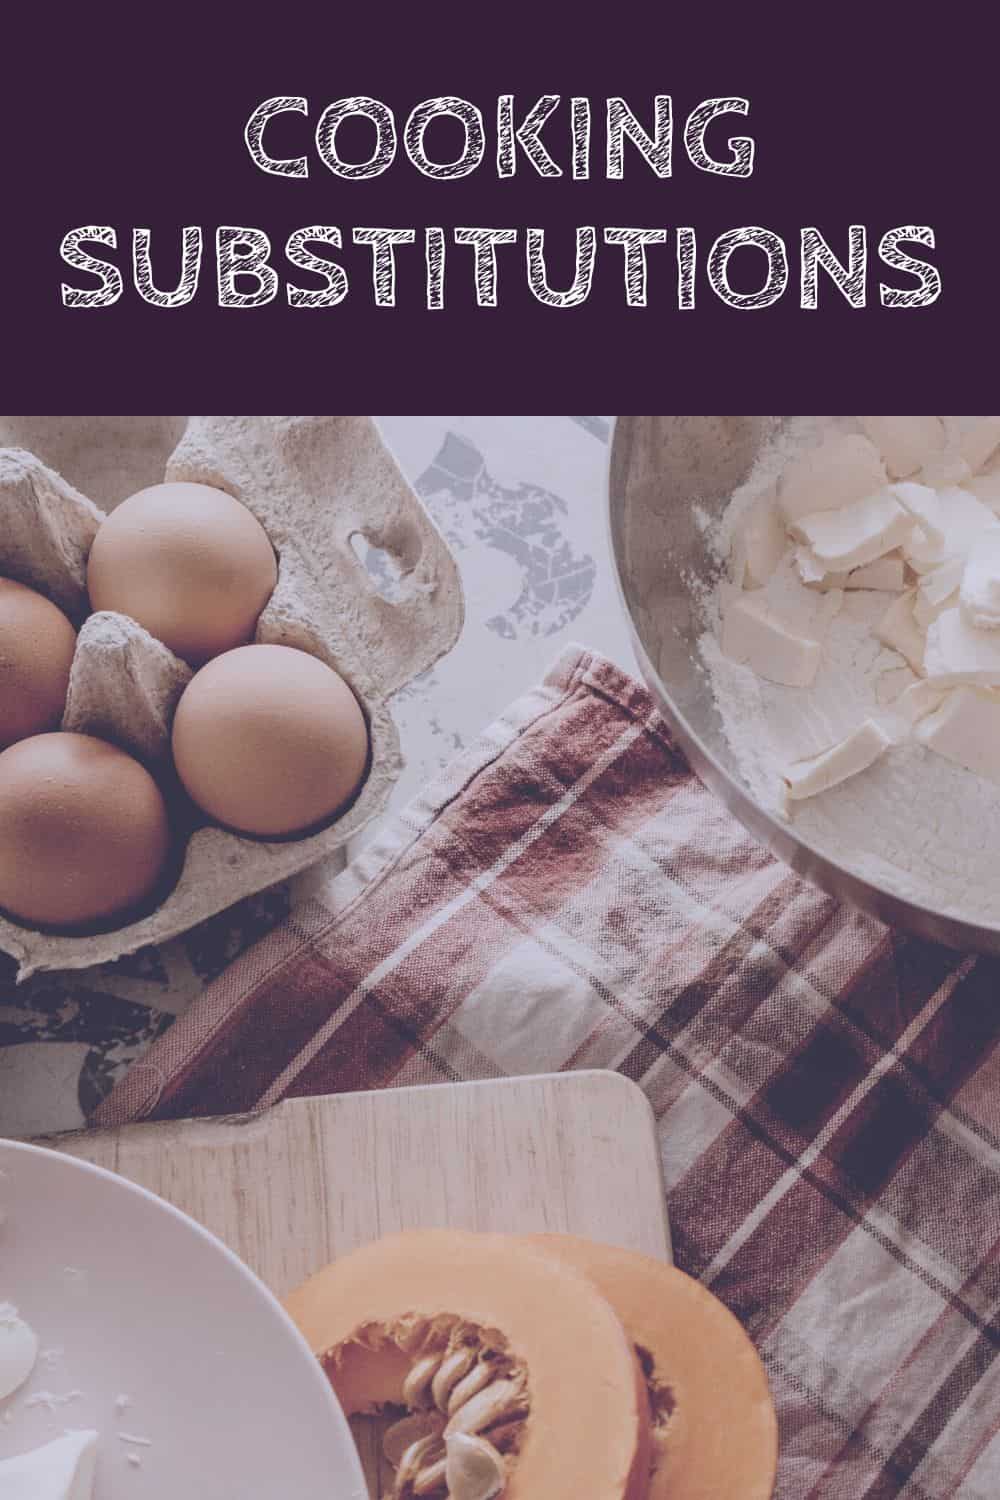 common cooking substitutions. We've all been there! About to cook a fantastic meal and realize that we don't have all of the ingredients we need! Don't worry! With these easy cooking substitutions, you can save your meal with an easy alternative!